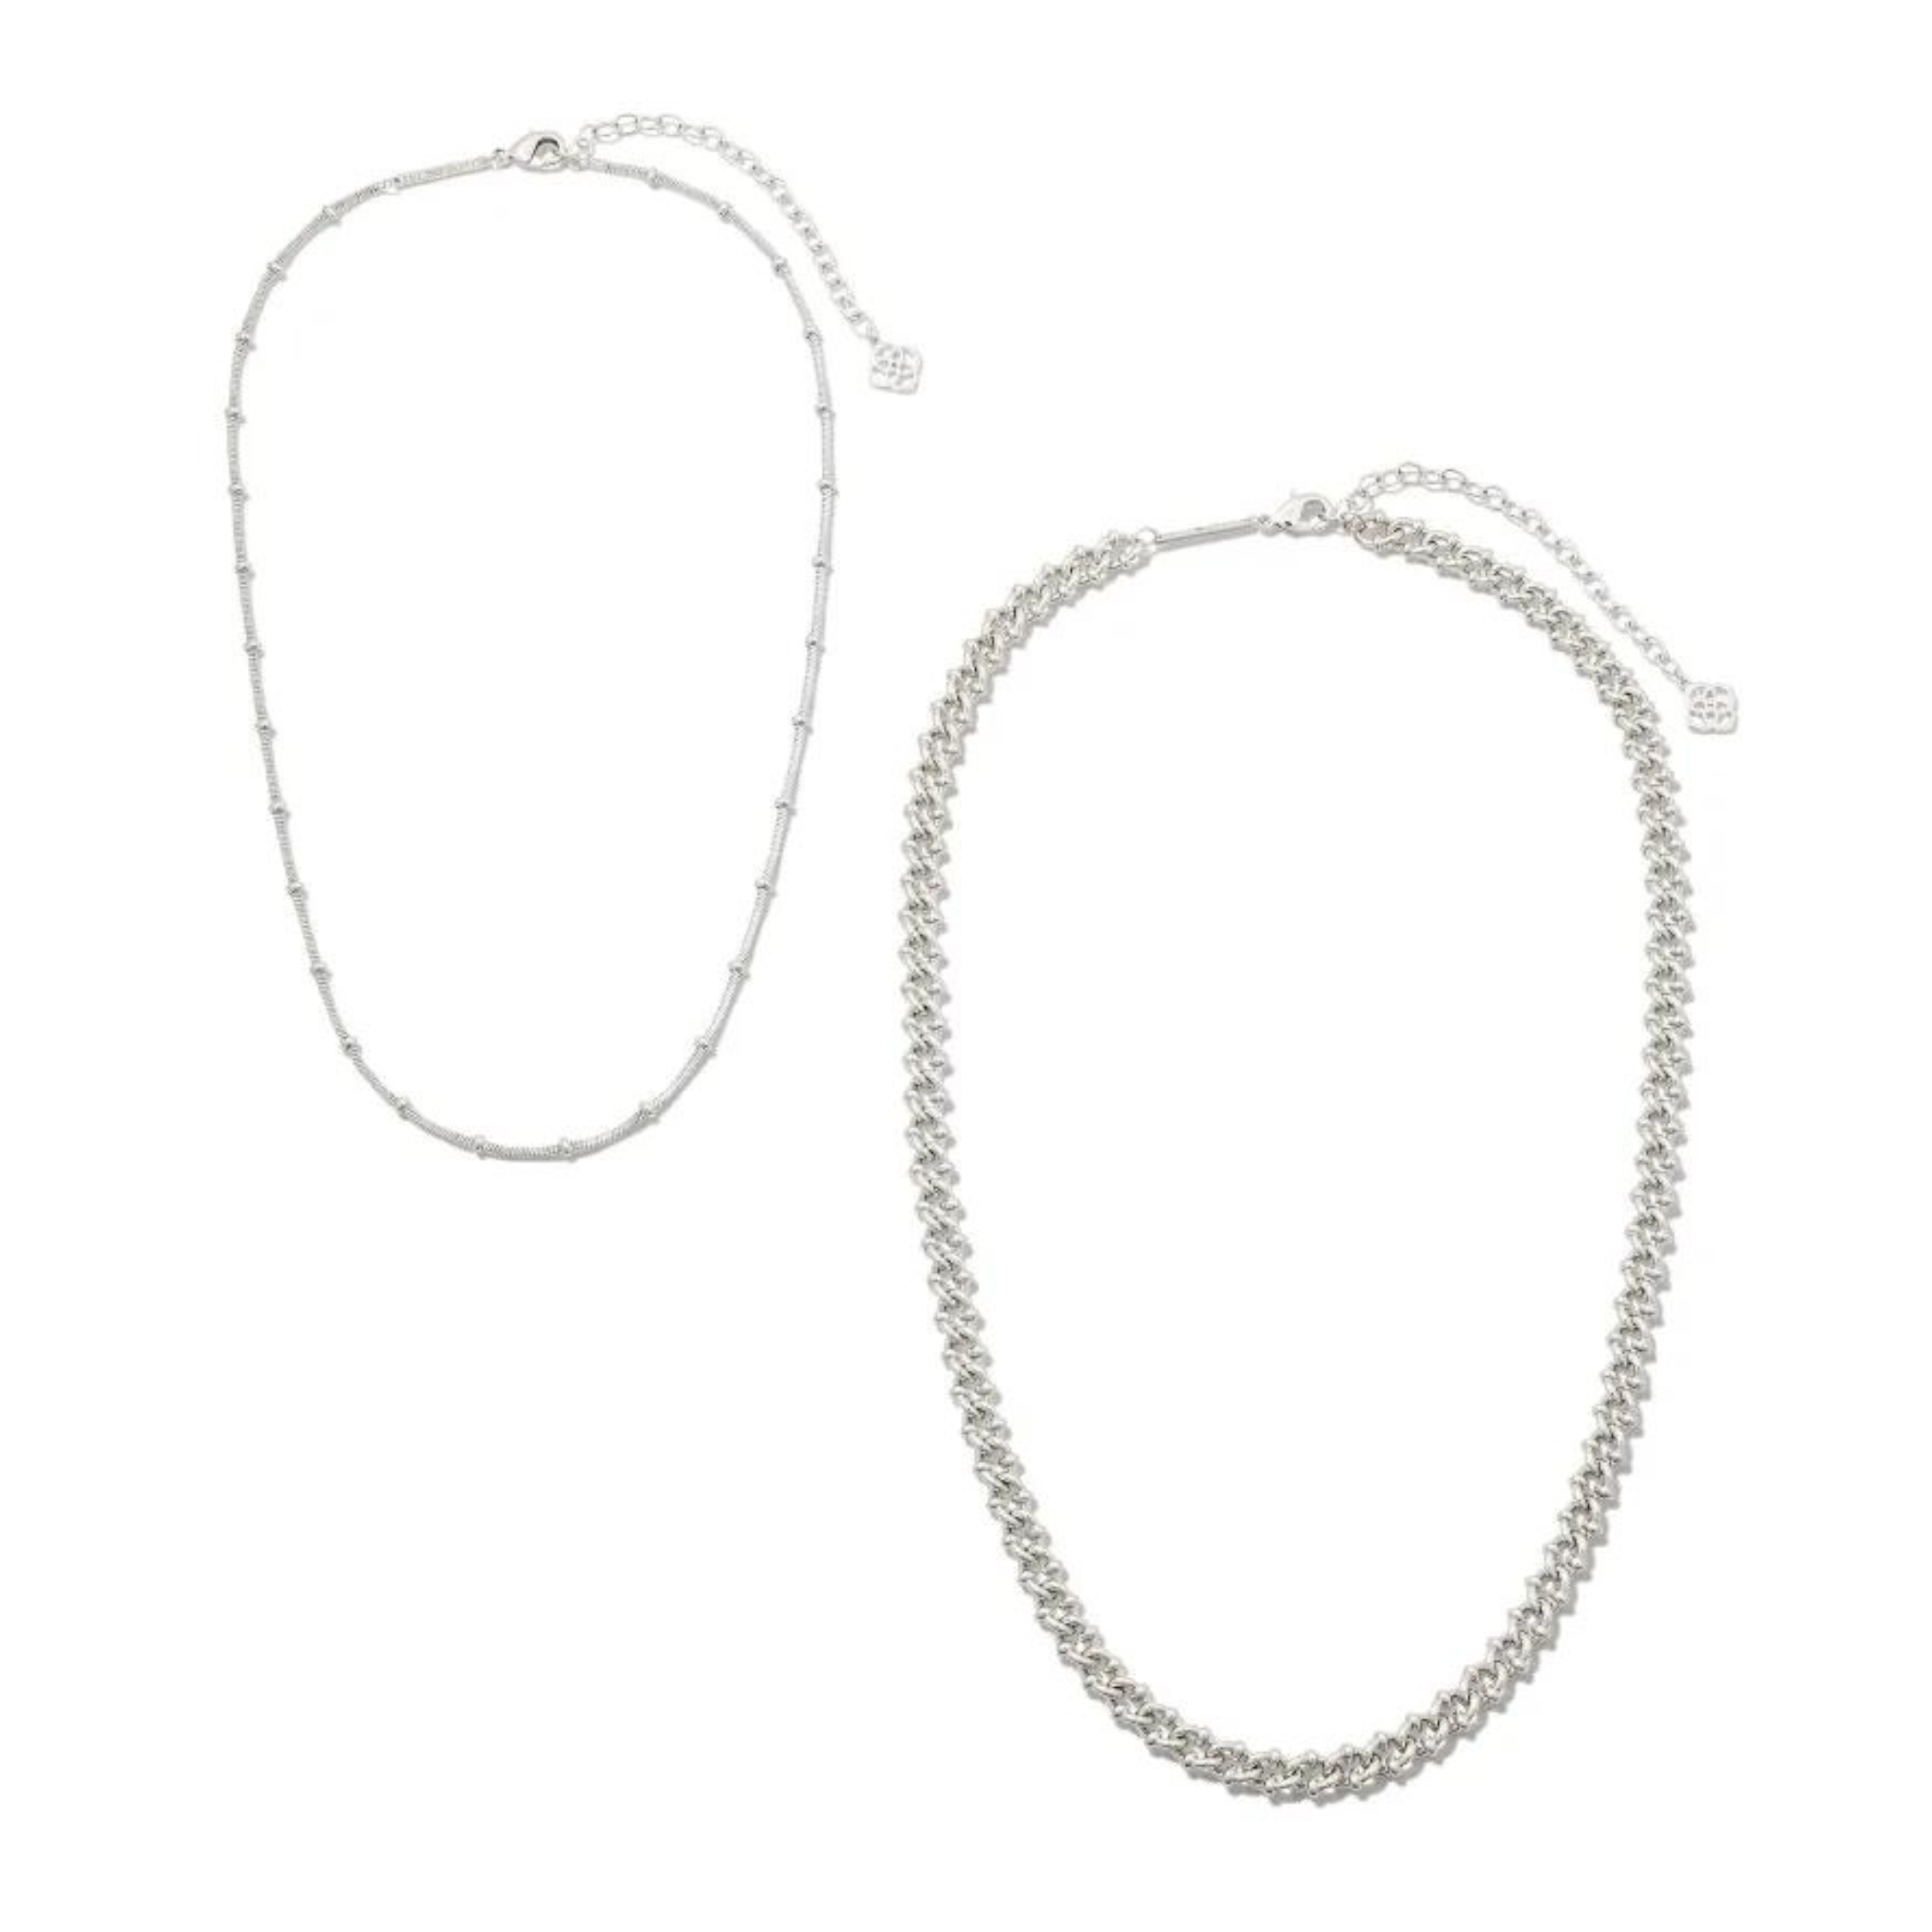 Kendra Scott | Lonnie Set of 2 Chain Necklaces in Silver - Giddy Up Glamour Boutique